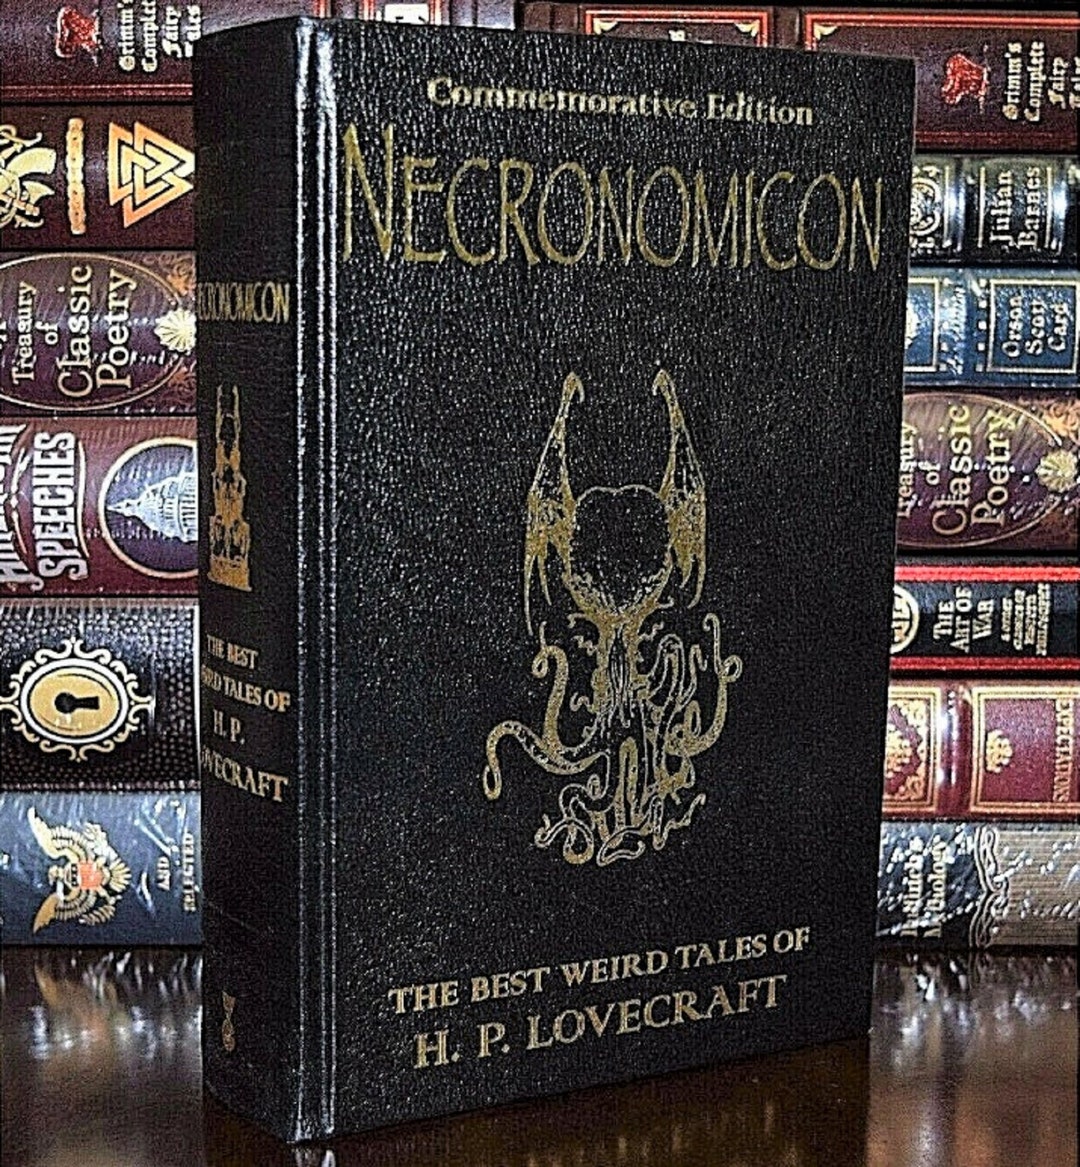 Necronomicon by Lovecraft Weird Tales of Terror Etsy 日本